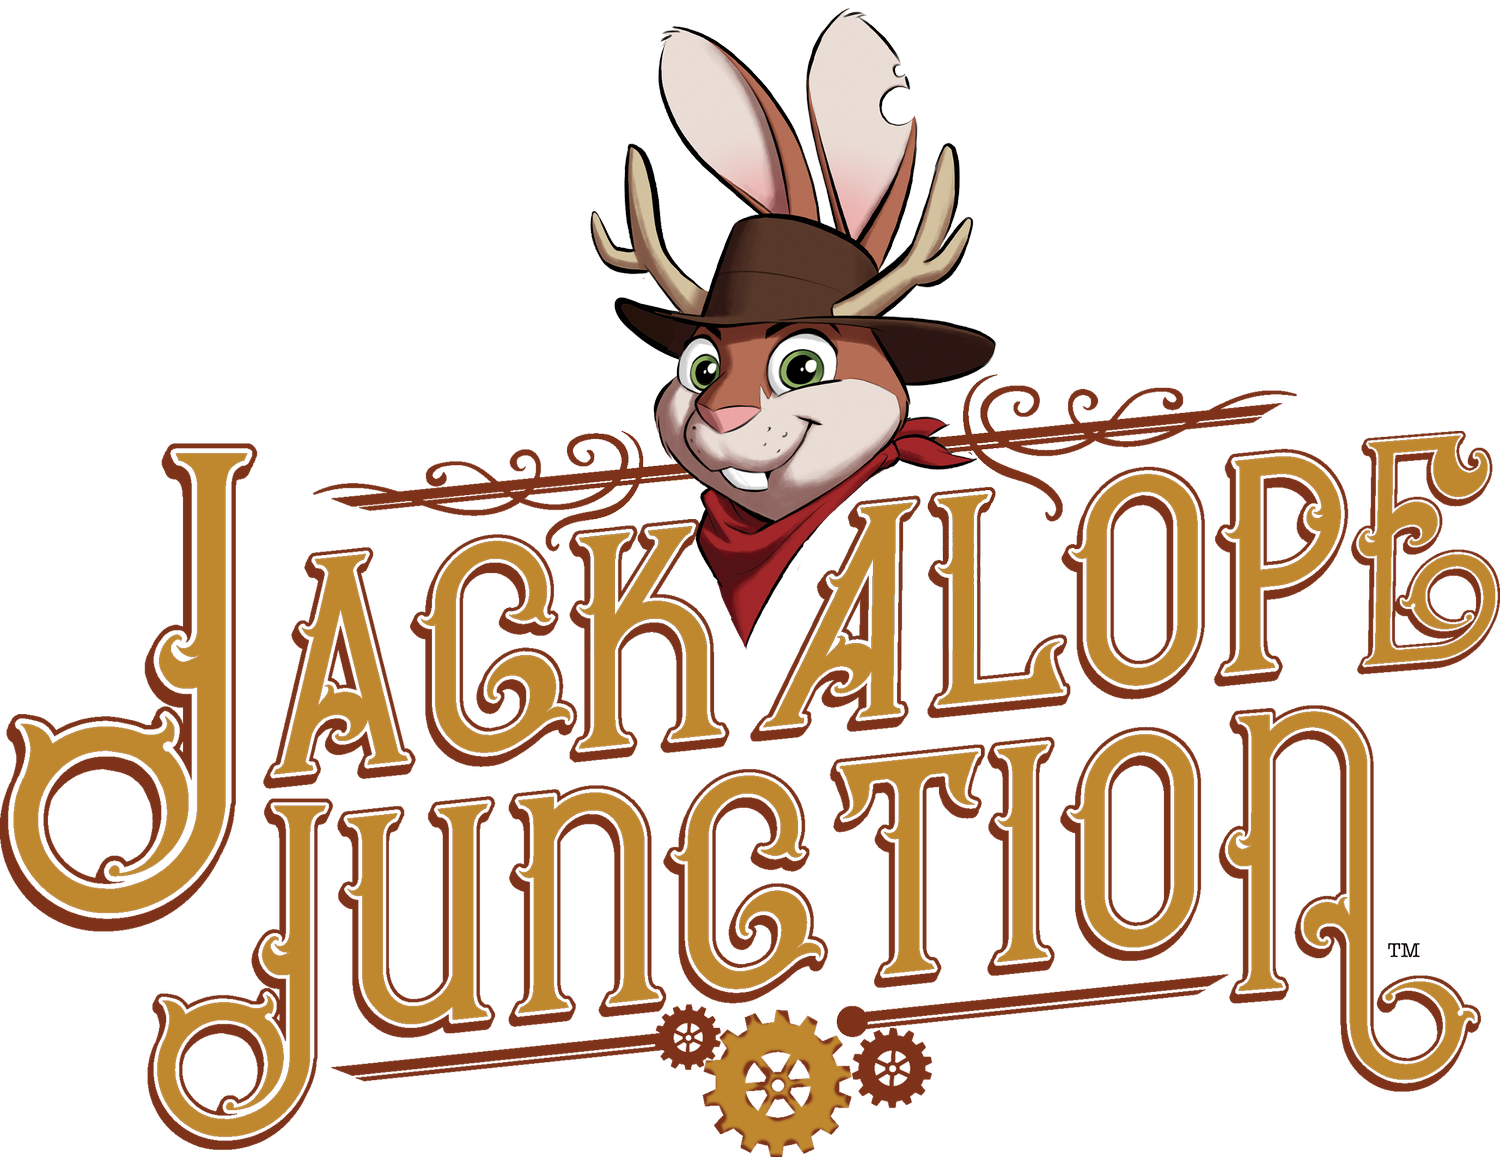 Welcome to Jackalope Junction